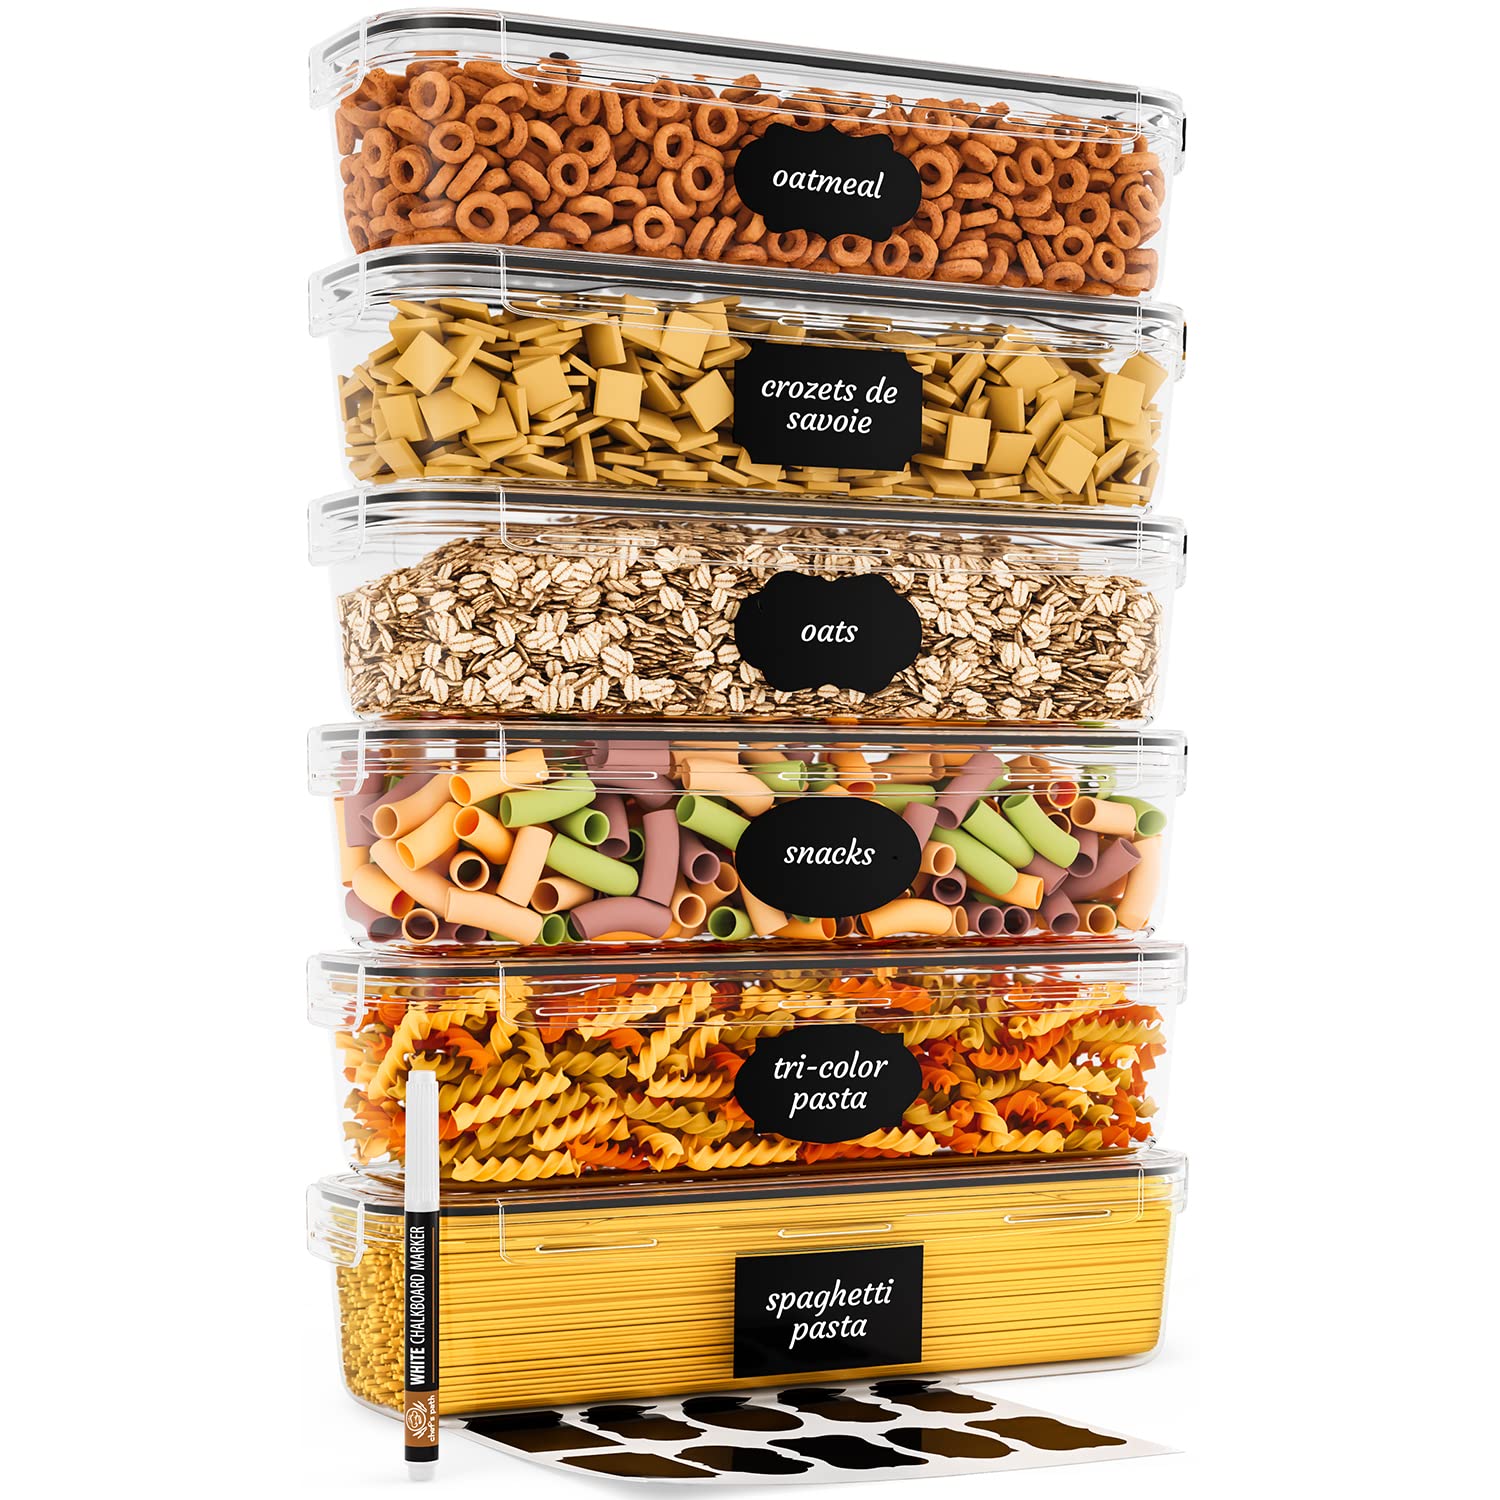 Chef's Path Airtight Food Storage Container Set (Set of 6) - Ideal for Pasta, Spaghetti & Noodles - Pasta Containers for Kitchen Organization and Storage - Plastic Canisters with Durable Lids